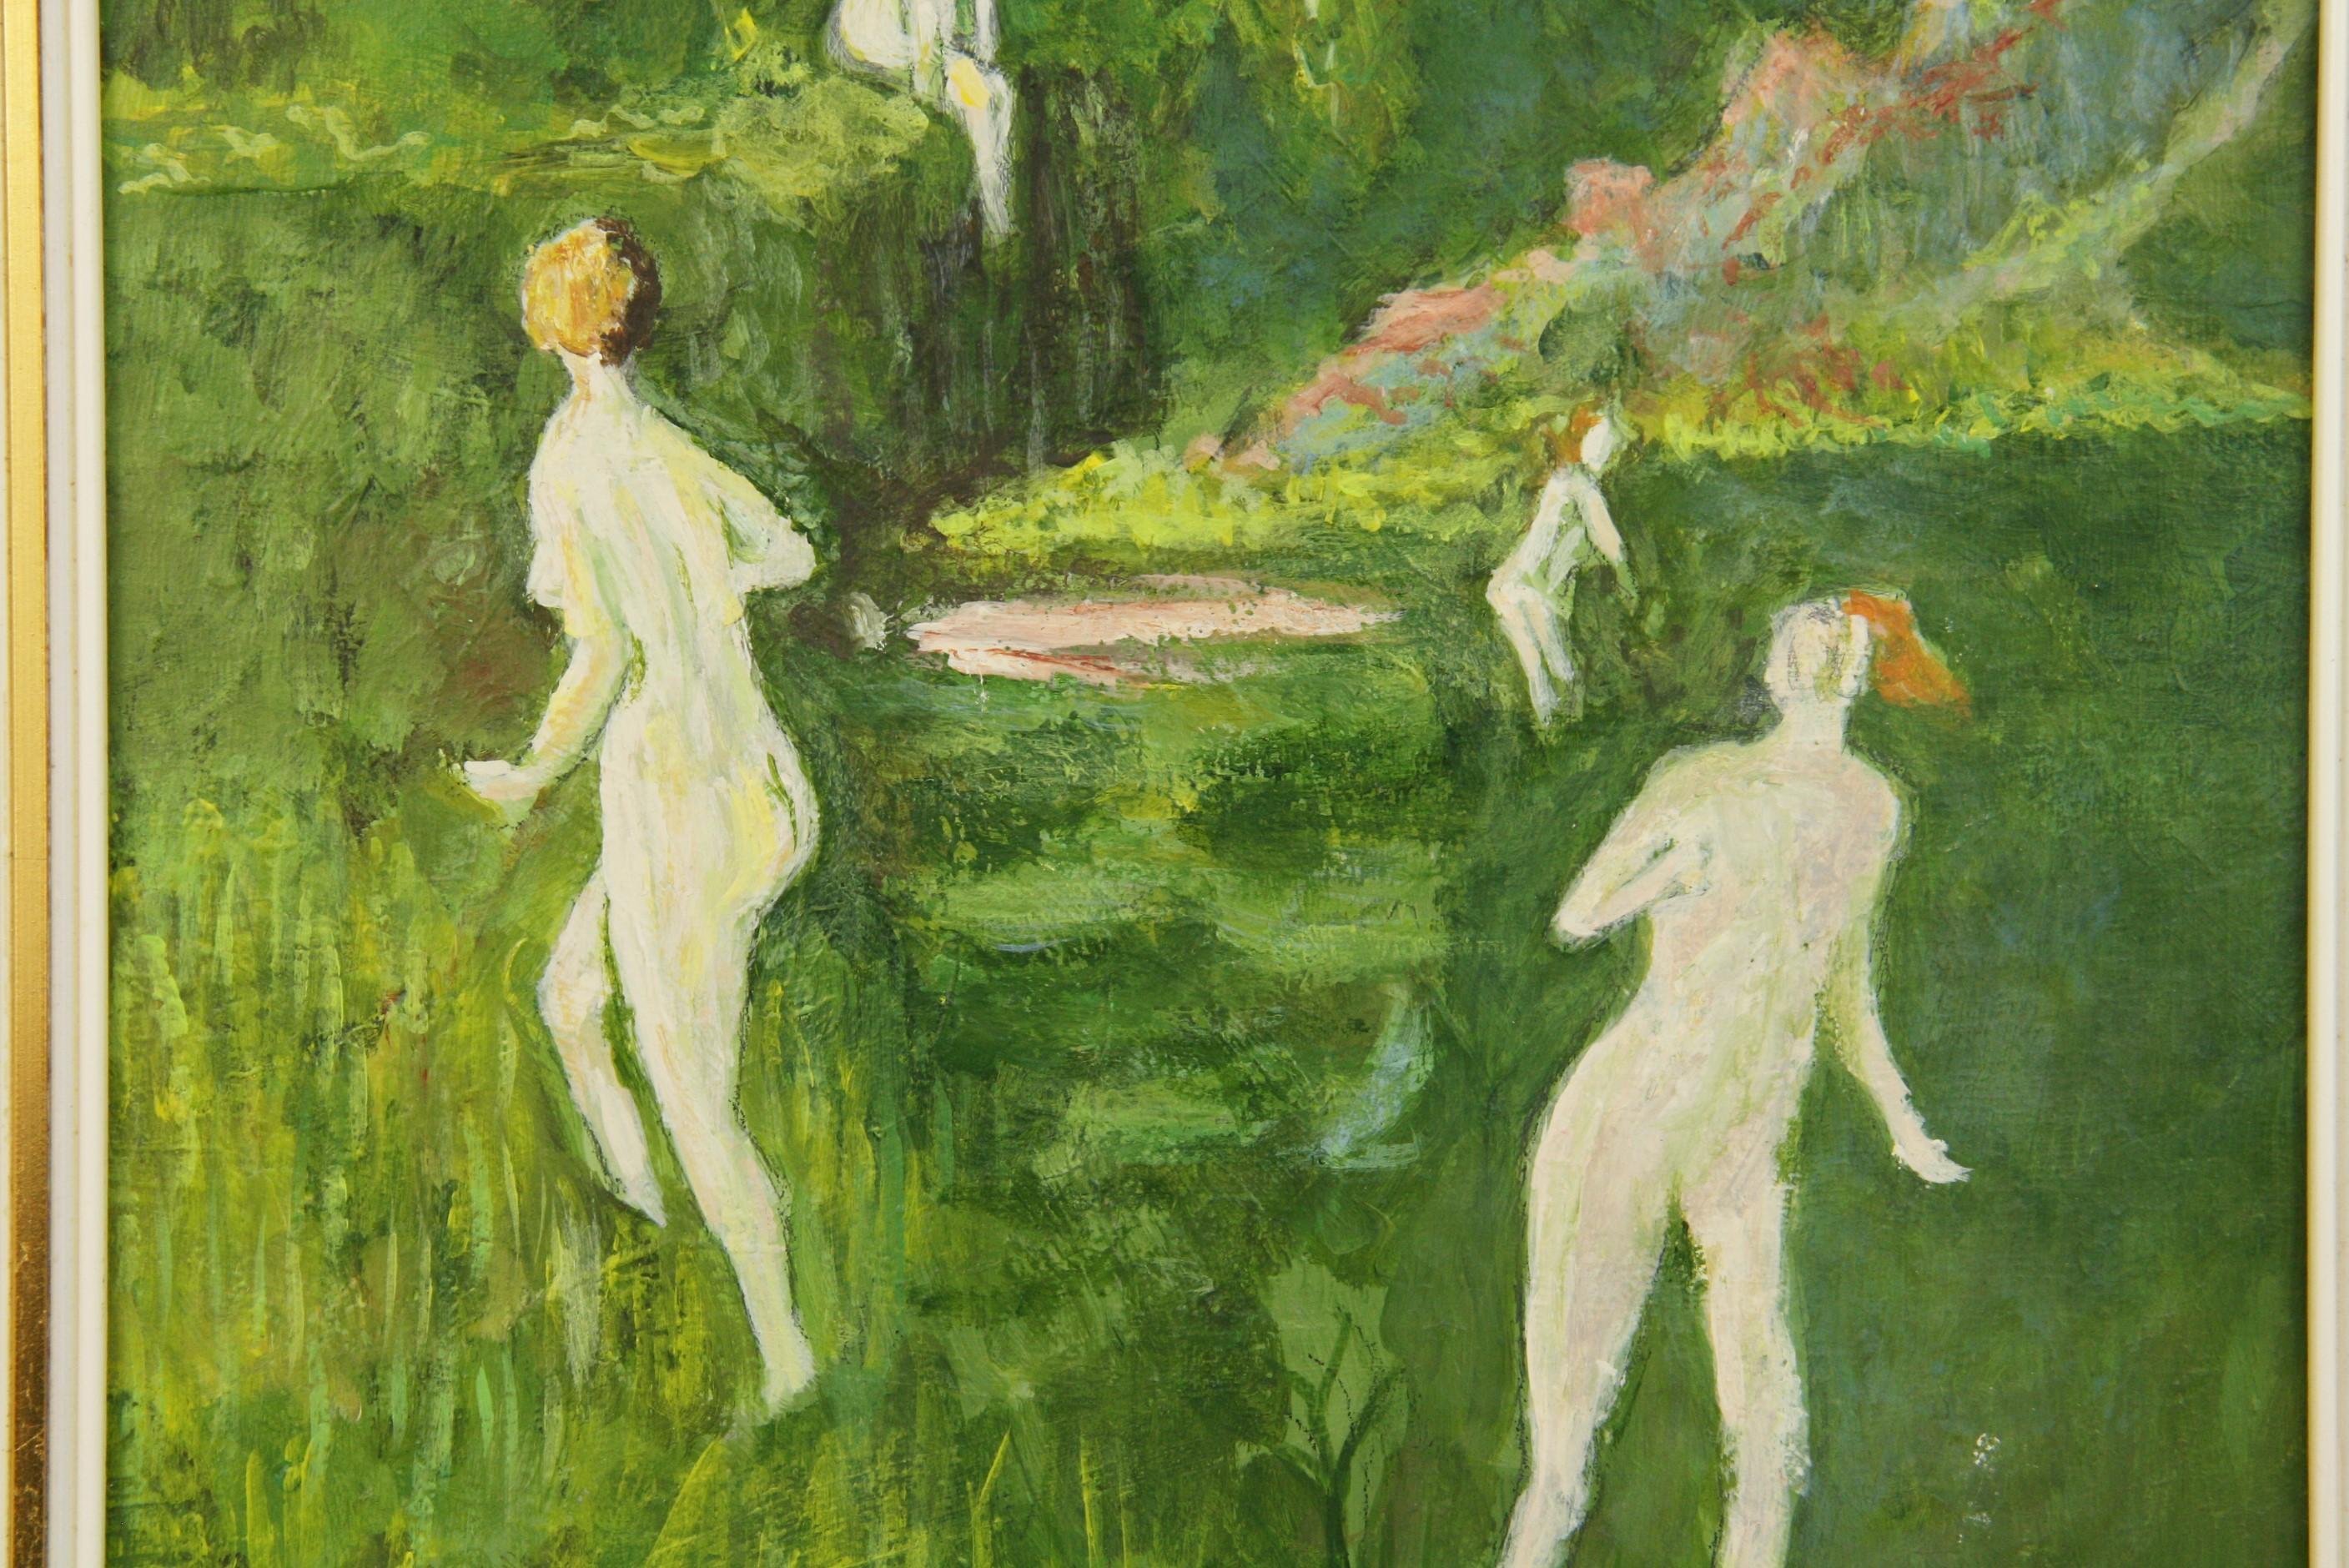 5-3318 Nude bathers in forest acrylic painting
Set in wood frame